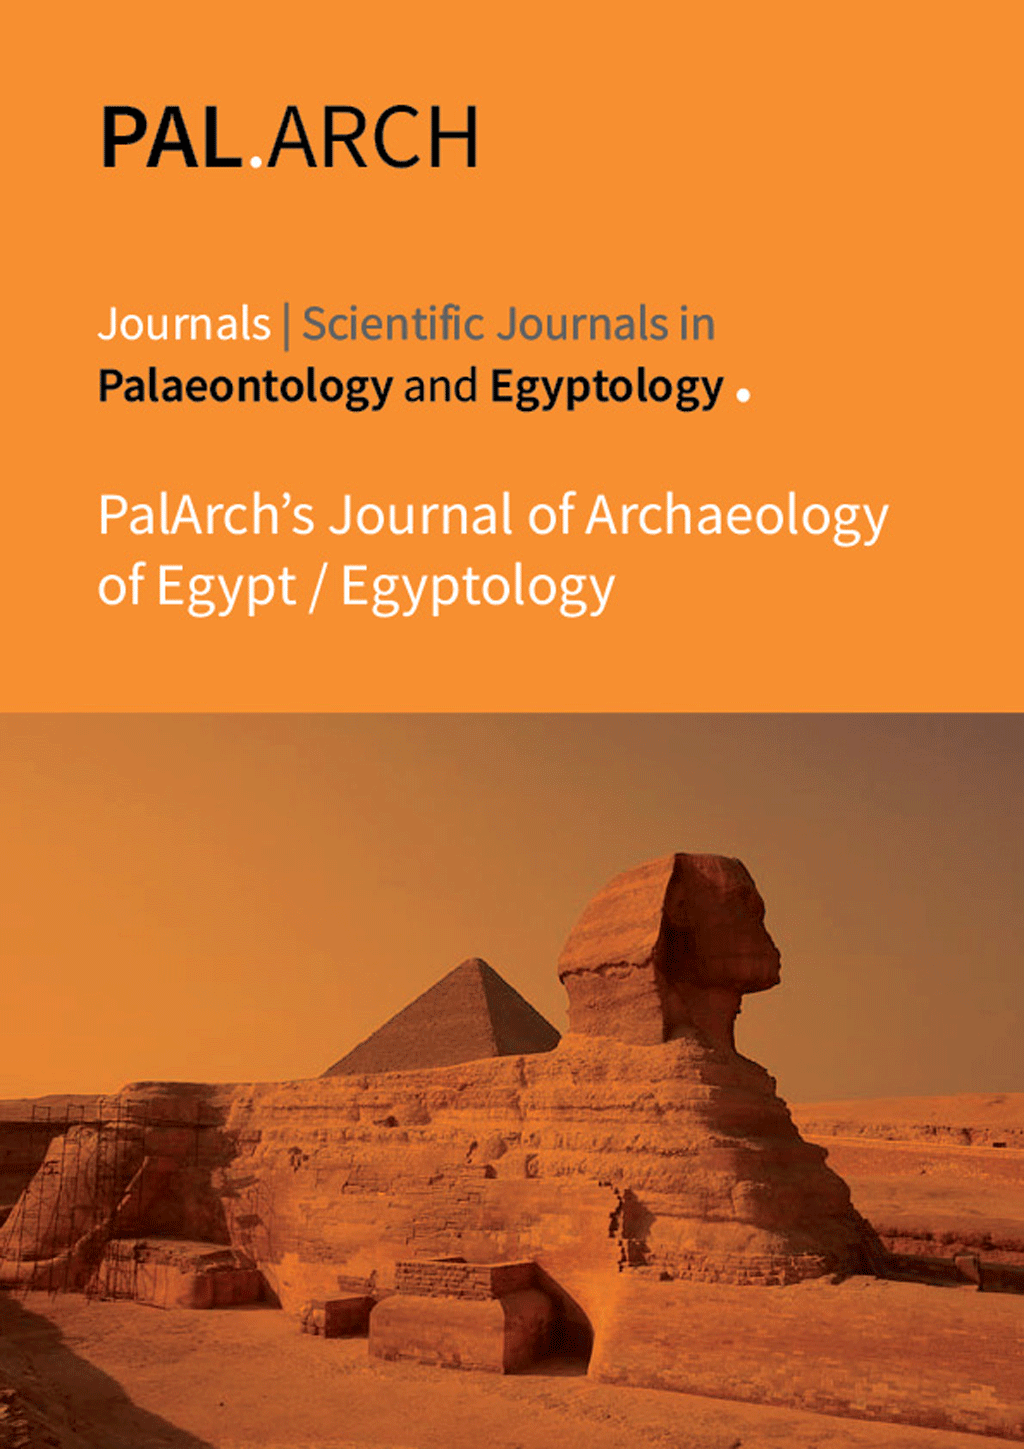 PalArch's Journal of Archaeology of Egypt